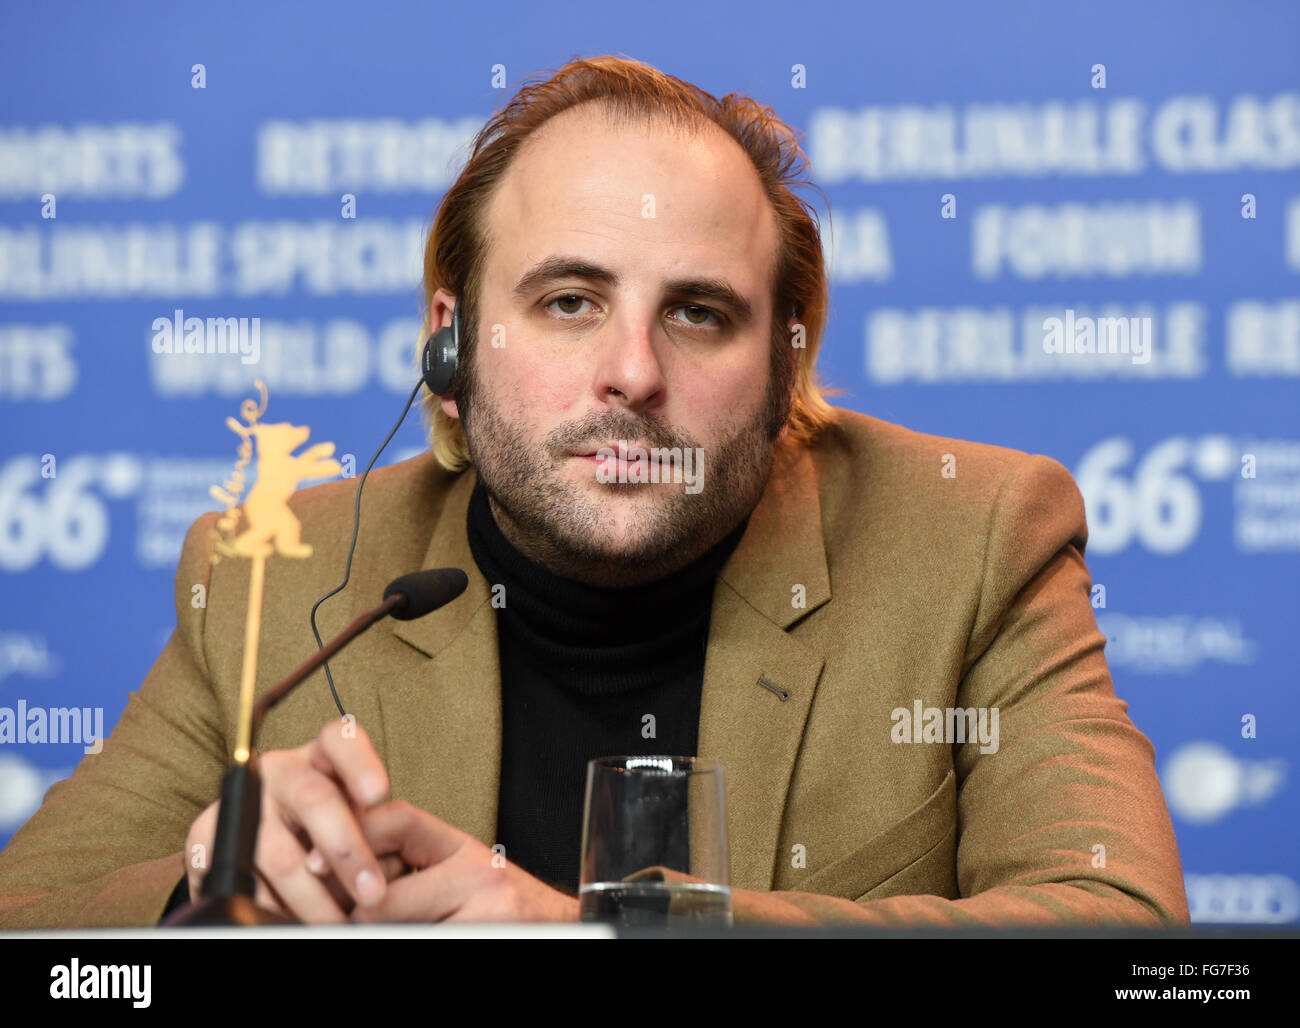 Berlin, Germany. 11th Feb, 2016. 66th International Film Festival in Berlin, Germany, 11 February 2016. Press conference 'Des nouvelles de la planete Mars' ('News from planet Mars'): Actor Vincent Macaigne. The film runs in Berlinale section Competition (not in competition). The Berlinale runs from 11 February to 21 February 2016. Photo: Jens Kalaene/dpa/Alamy Live News Stock Photo